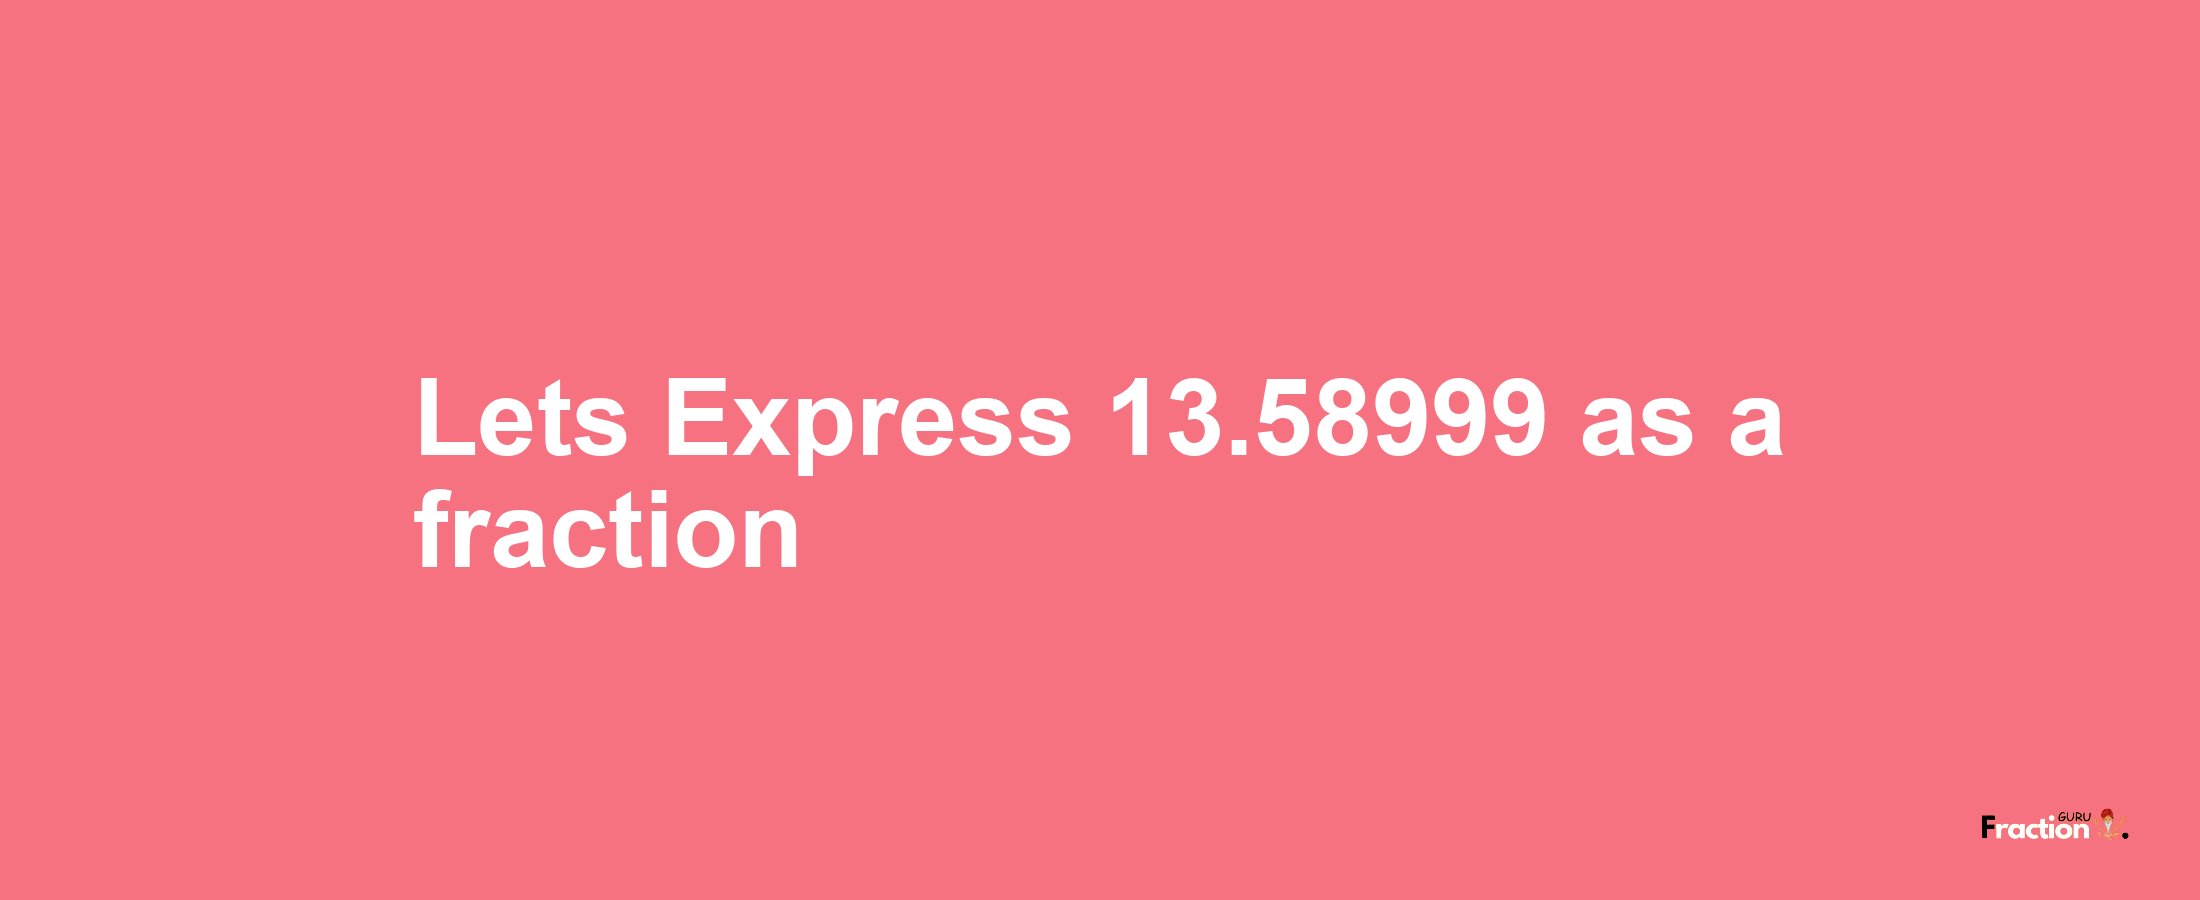 Lets Express 13.58999 as afraction